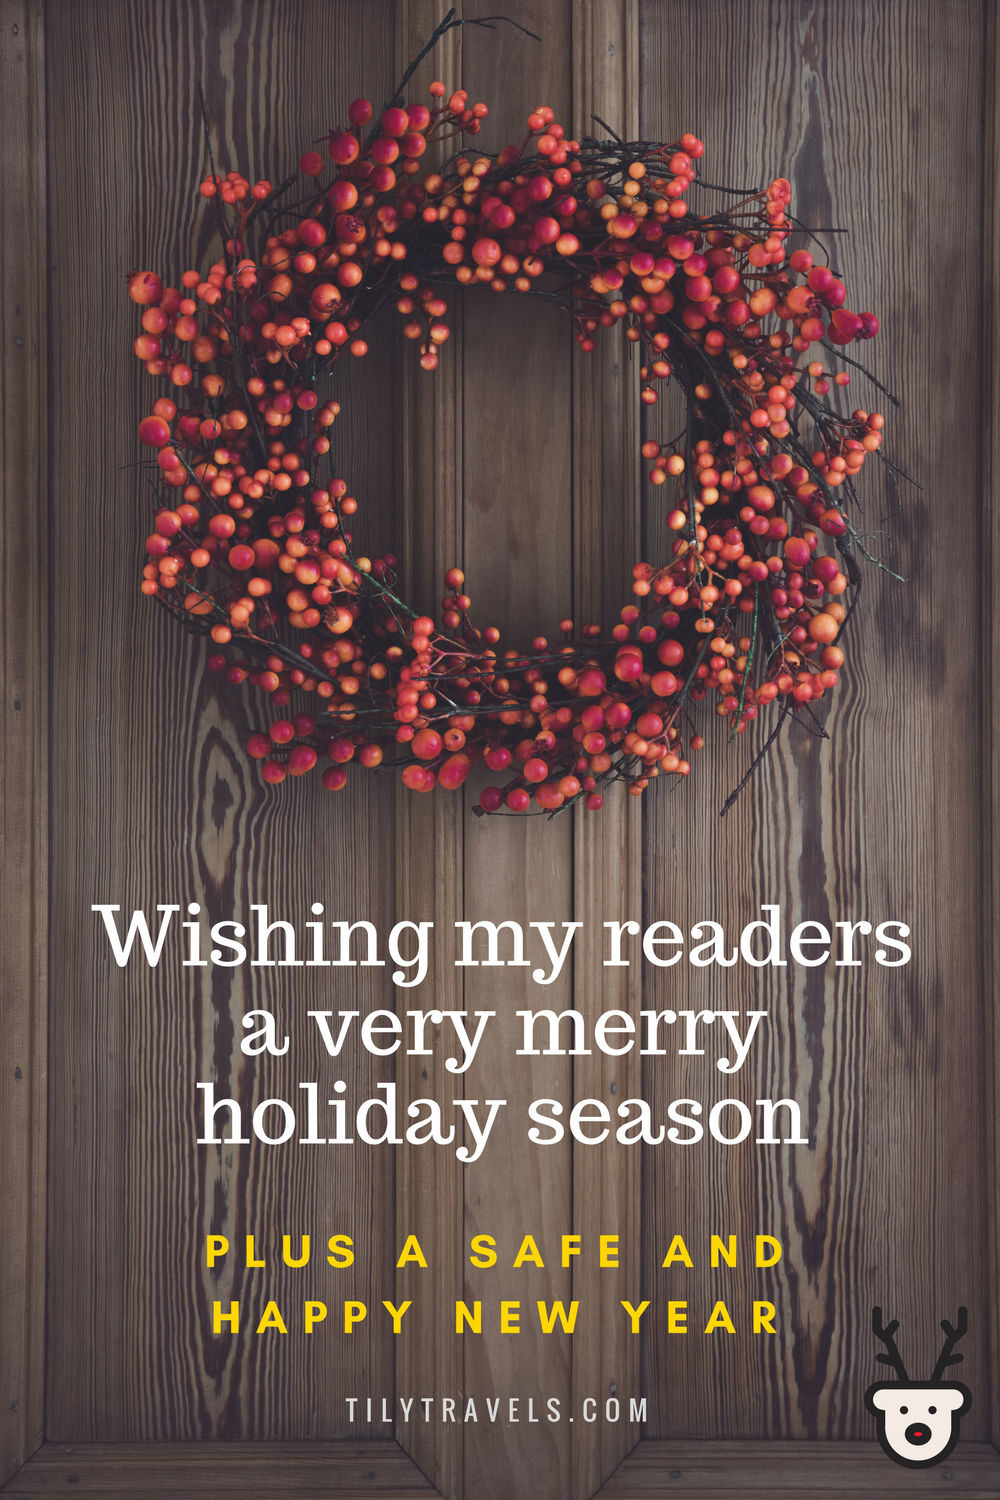 Wishing my readers a very merry holiday season, plus a safe and happy new year.